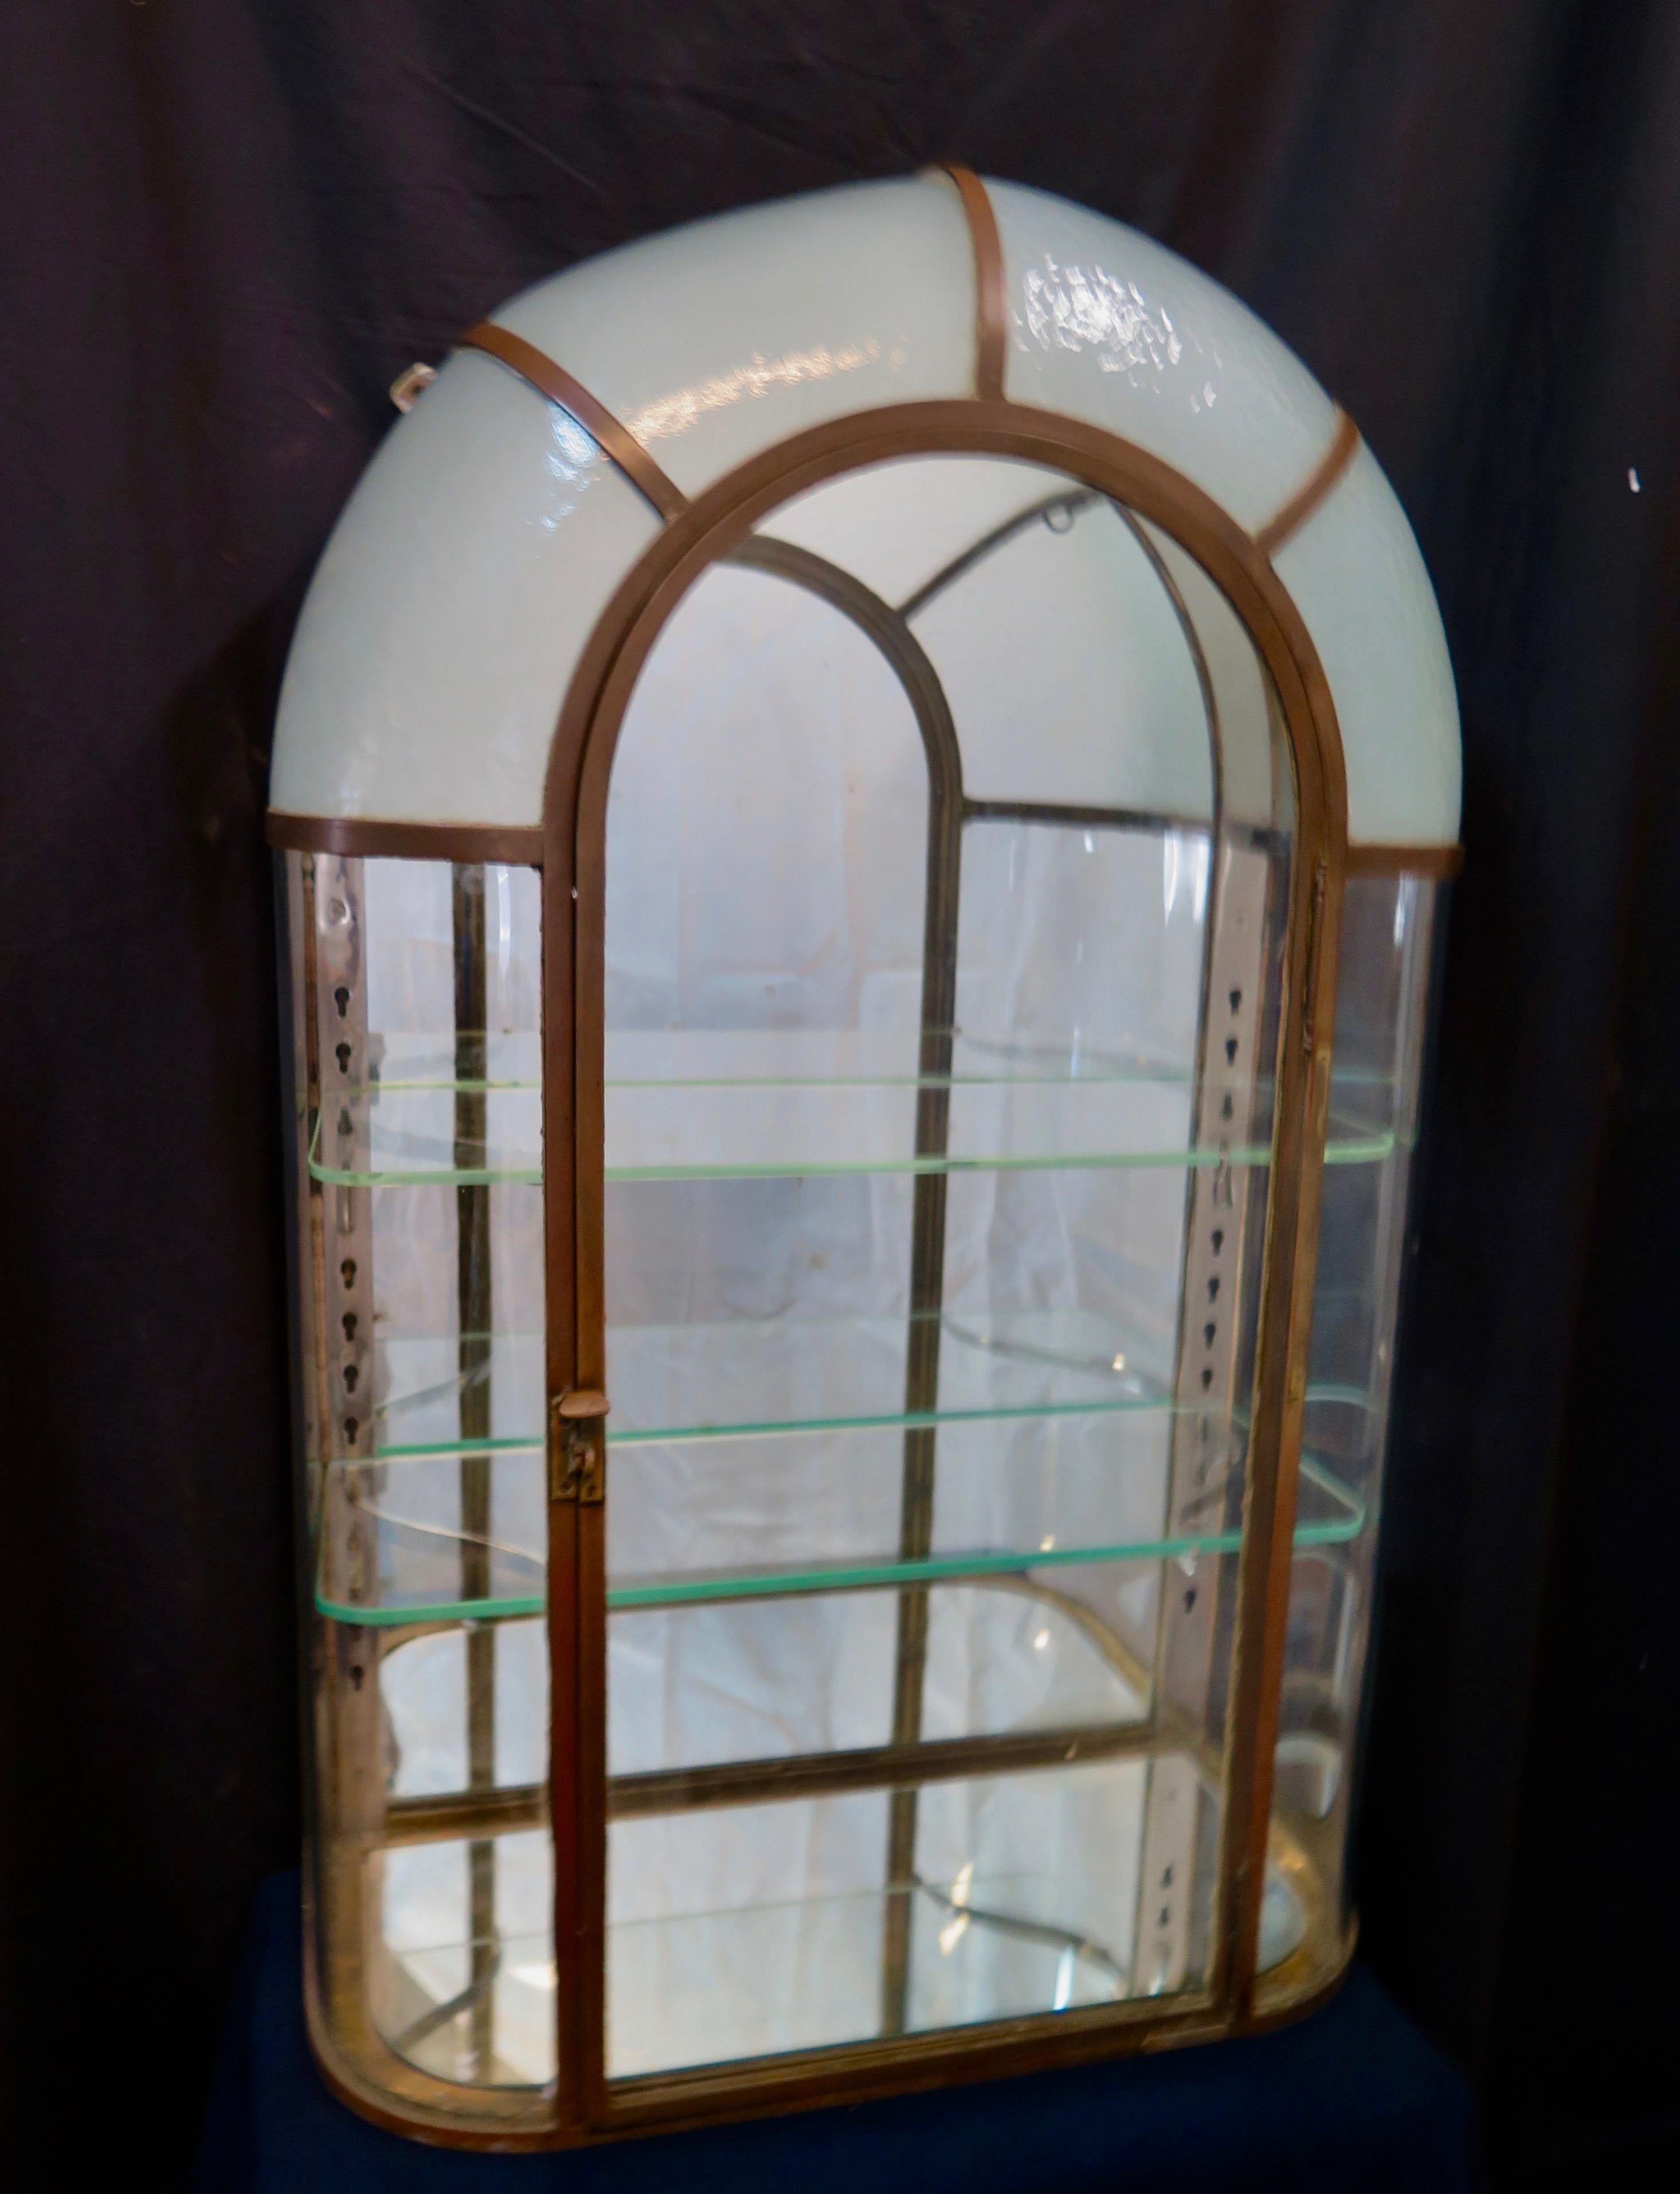 This wonderful Parisian perfume curio was designed by Joly & Co., 100 Rue de Roquette, Paris in the Art Deco period. This rare cabinet has a solid bronze frame, curved glass side panels, a bonnet of four curved textured & frosted glass panels & a